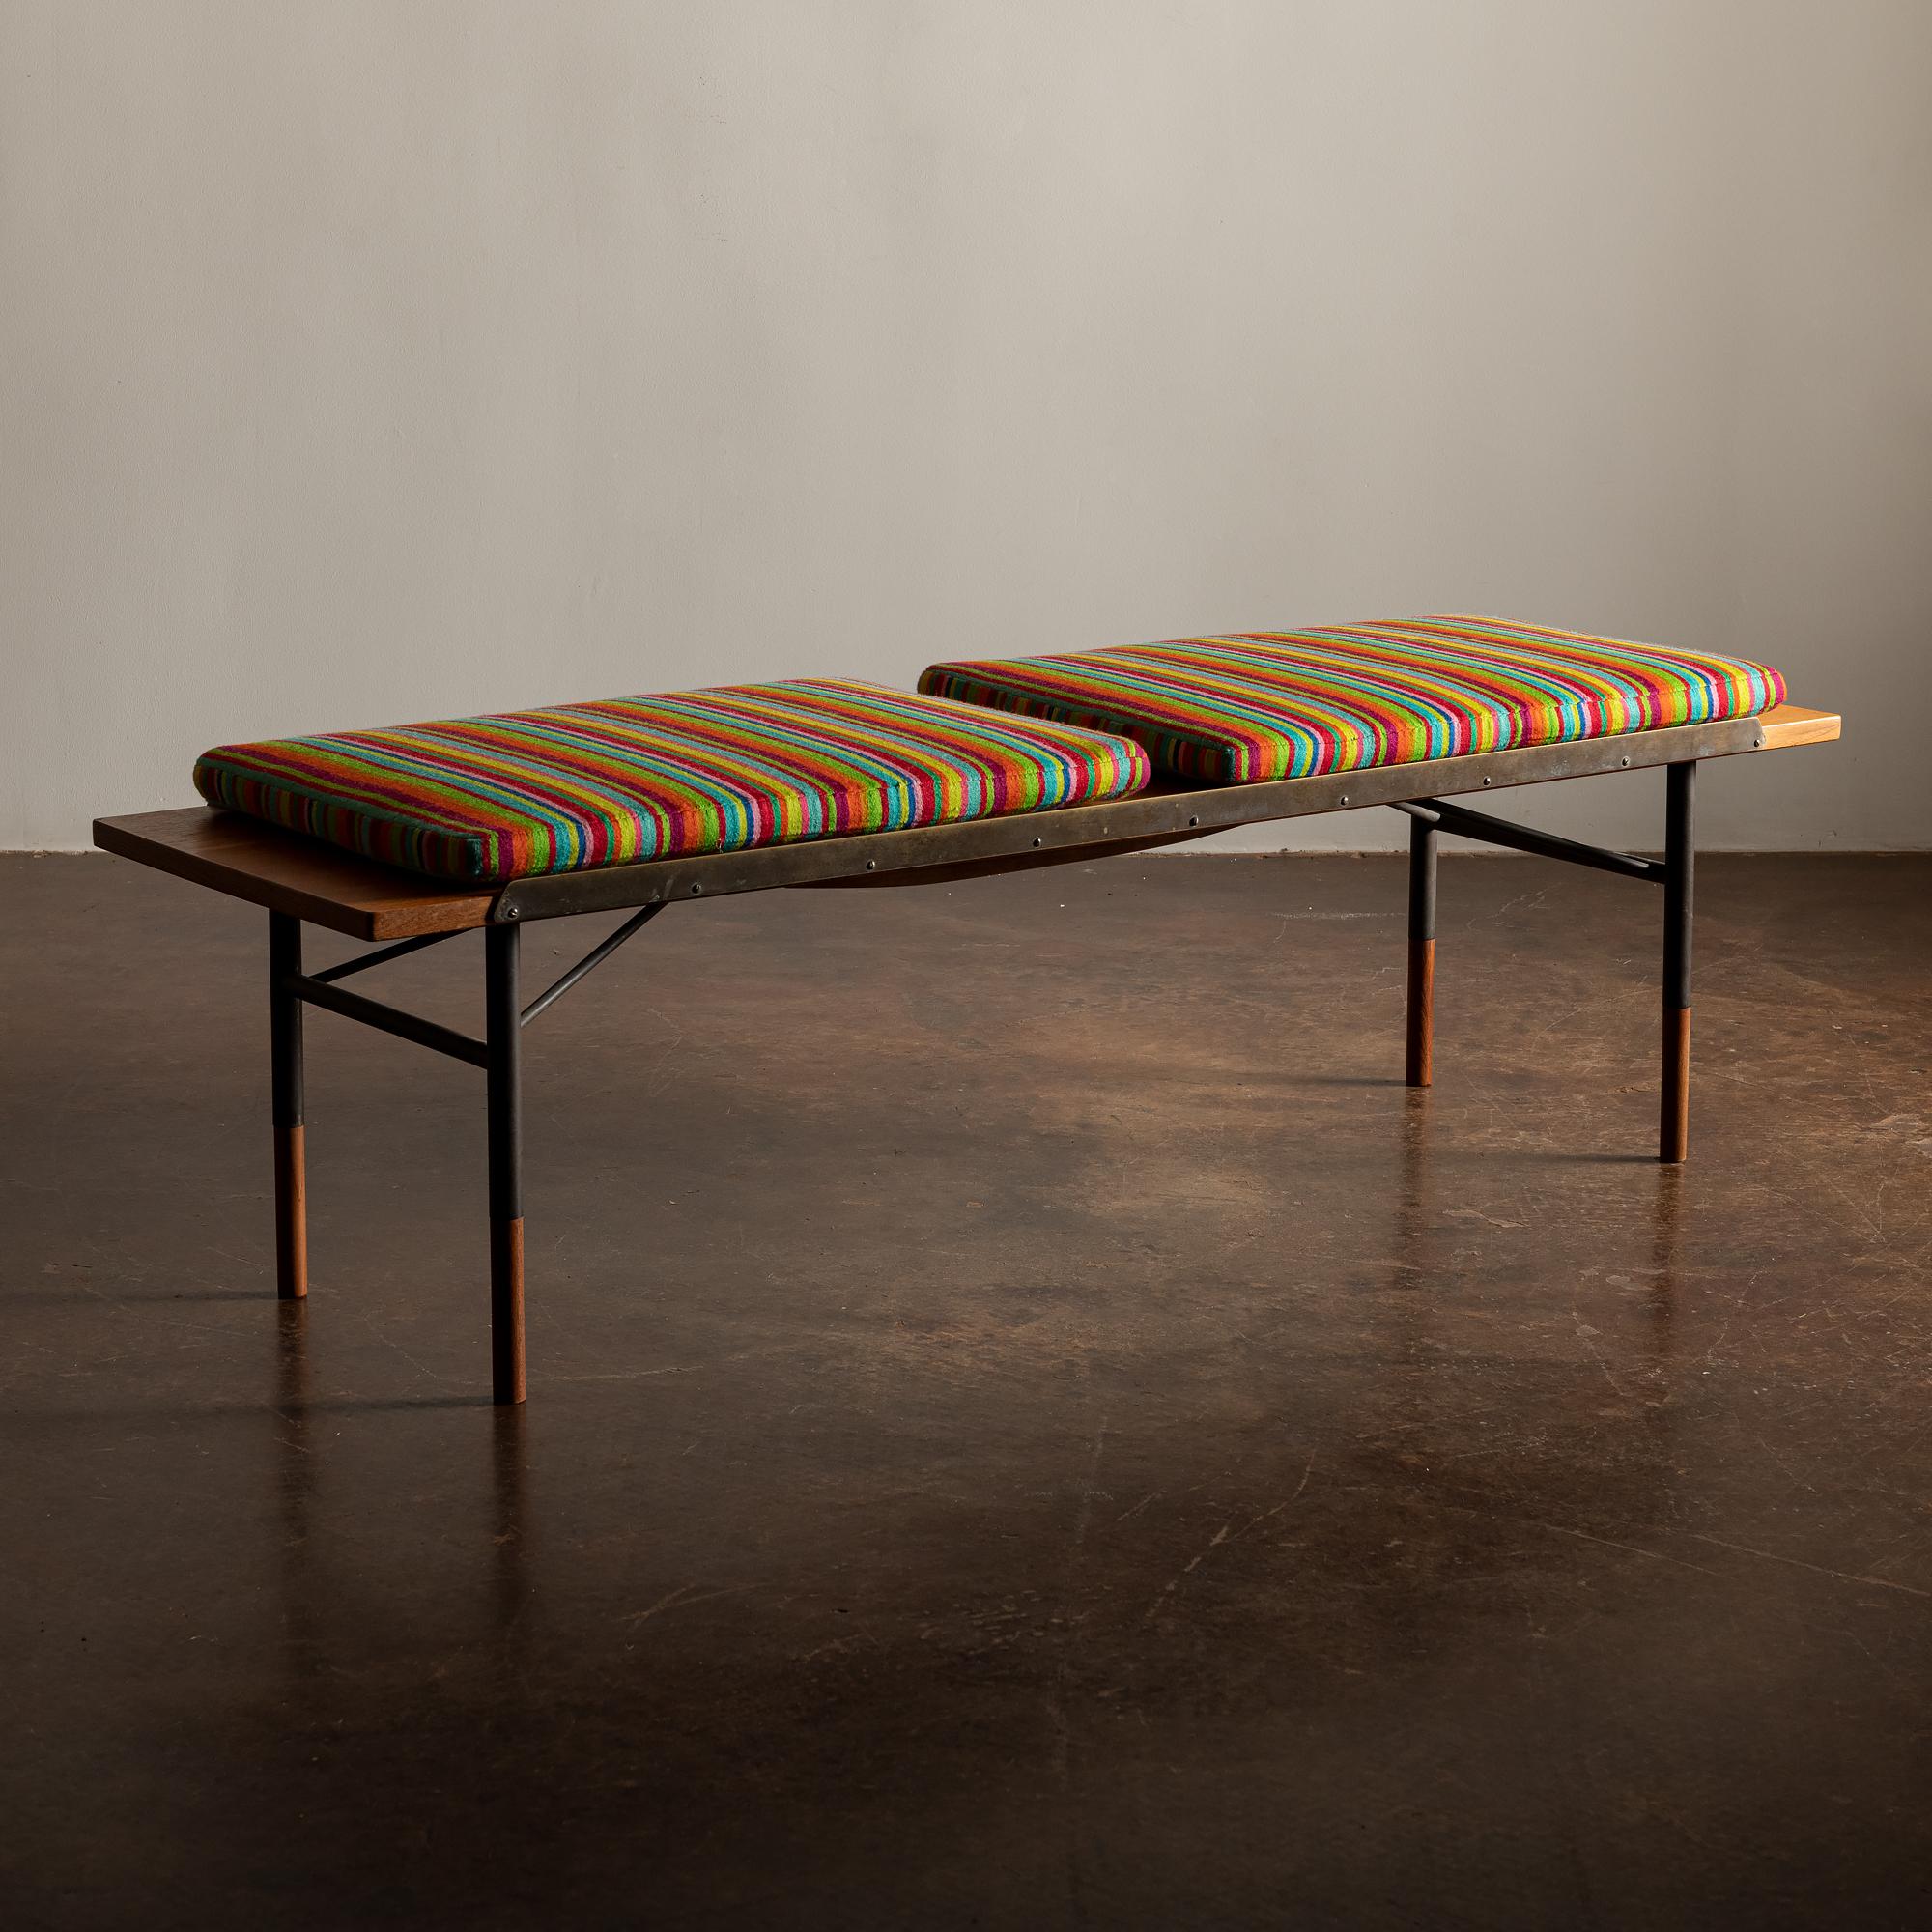 Beautiful bench designed by Finn Juhl for Bovirke in 1953 with anodized steel frame, teak seat, tall teak shoes and raised brass edges. Conceived by Juhl to be used as a bench and/or coffee table. This example manufactured by Bovirke circa 1960s.